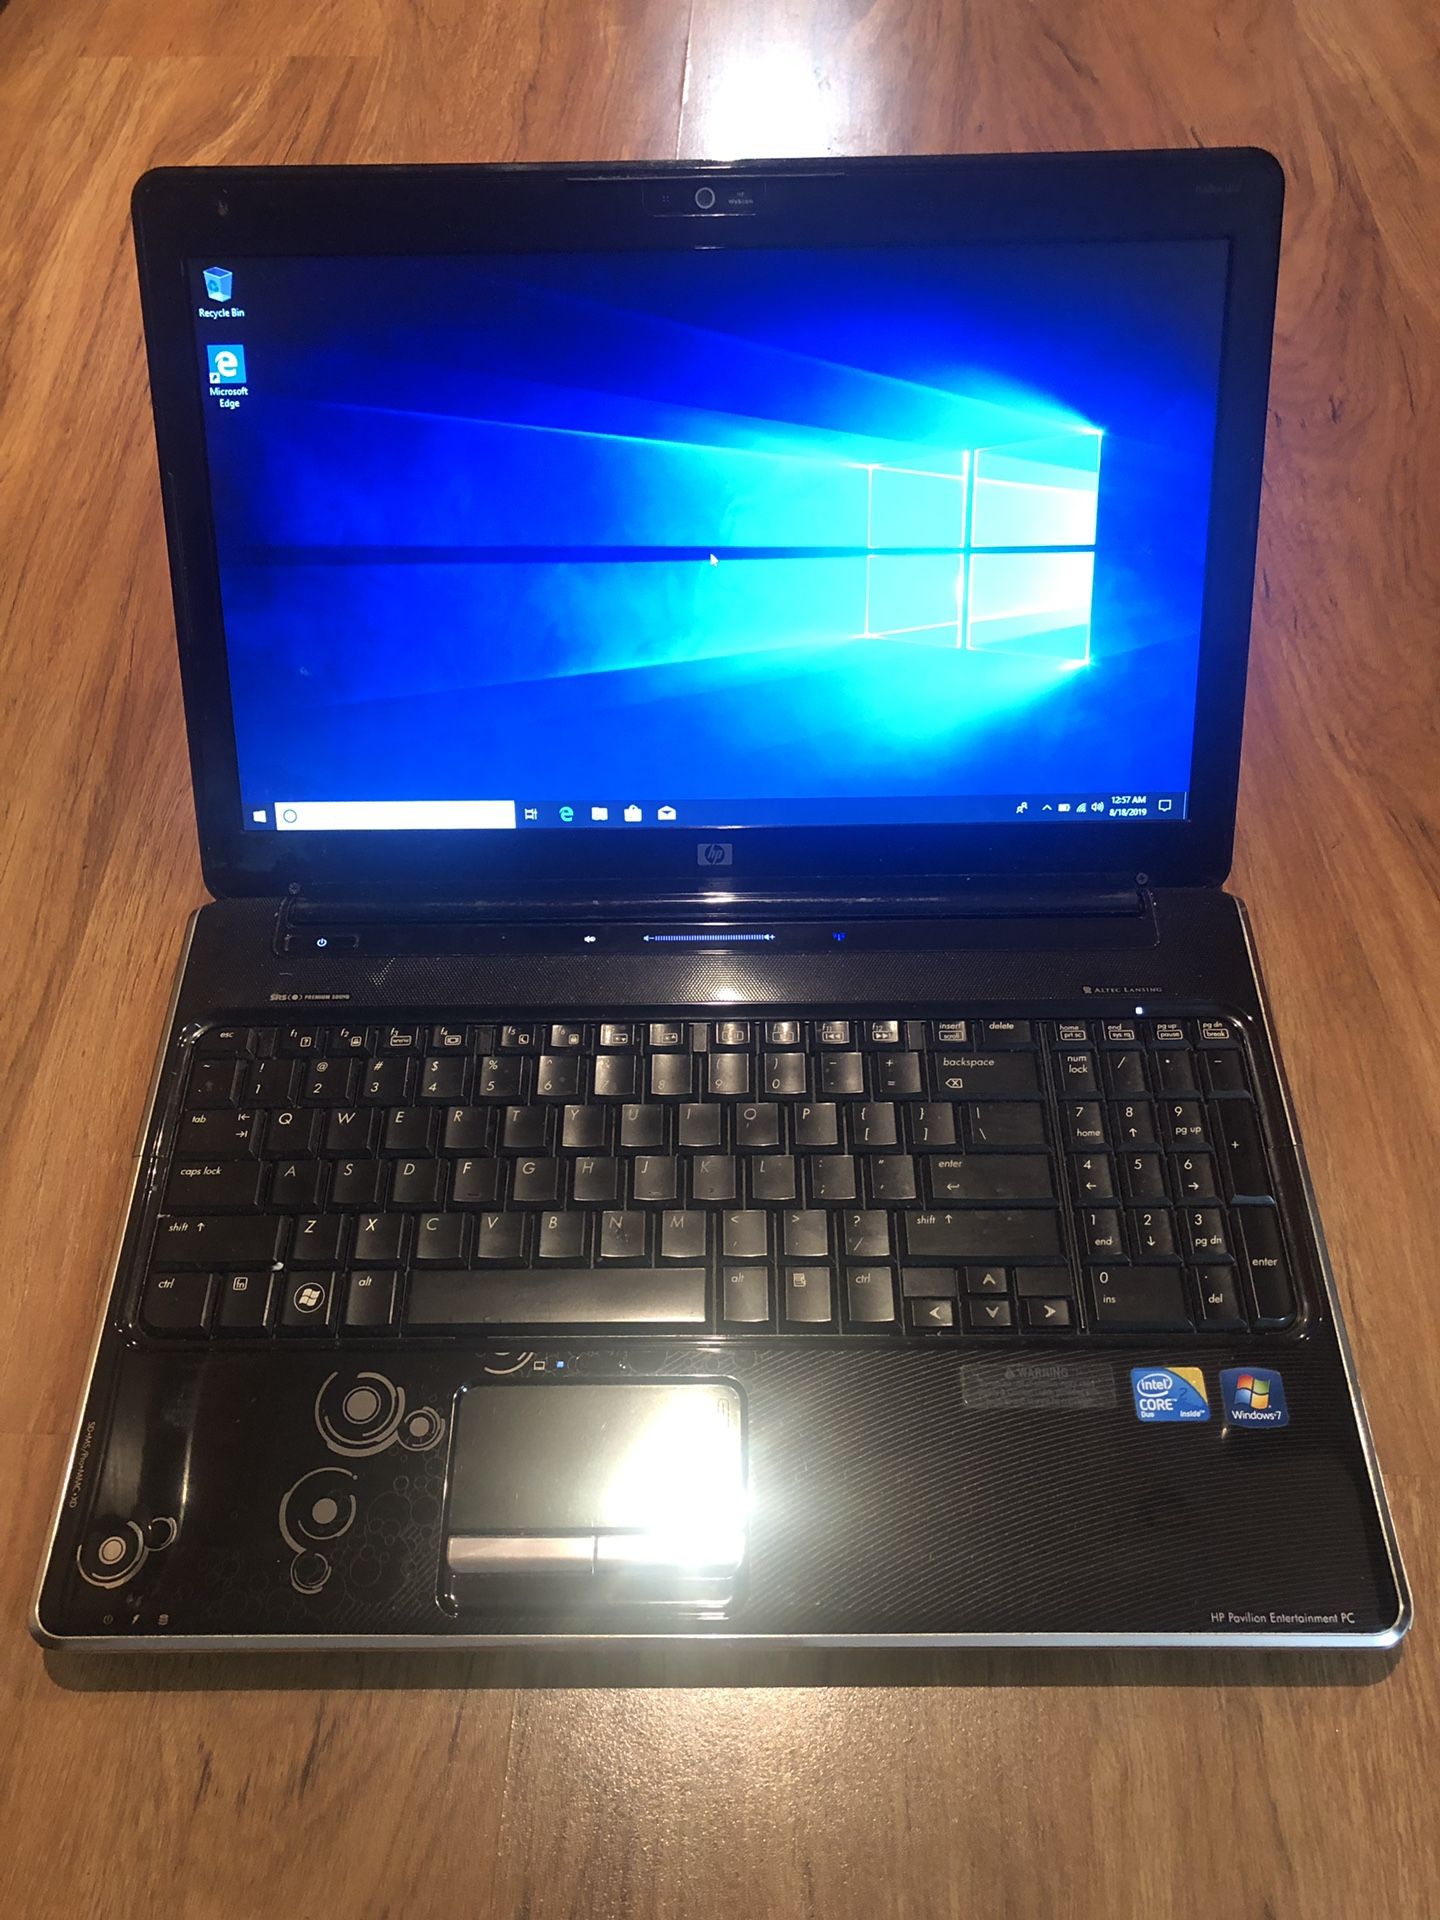 HP Pavilion dv6 4GB Ram 160GB Hard Drive 15.6 inch Windows 10 Pro Laptop with HDMI output & charger in Excellent Working condition!!!!!!!!